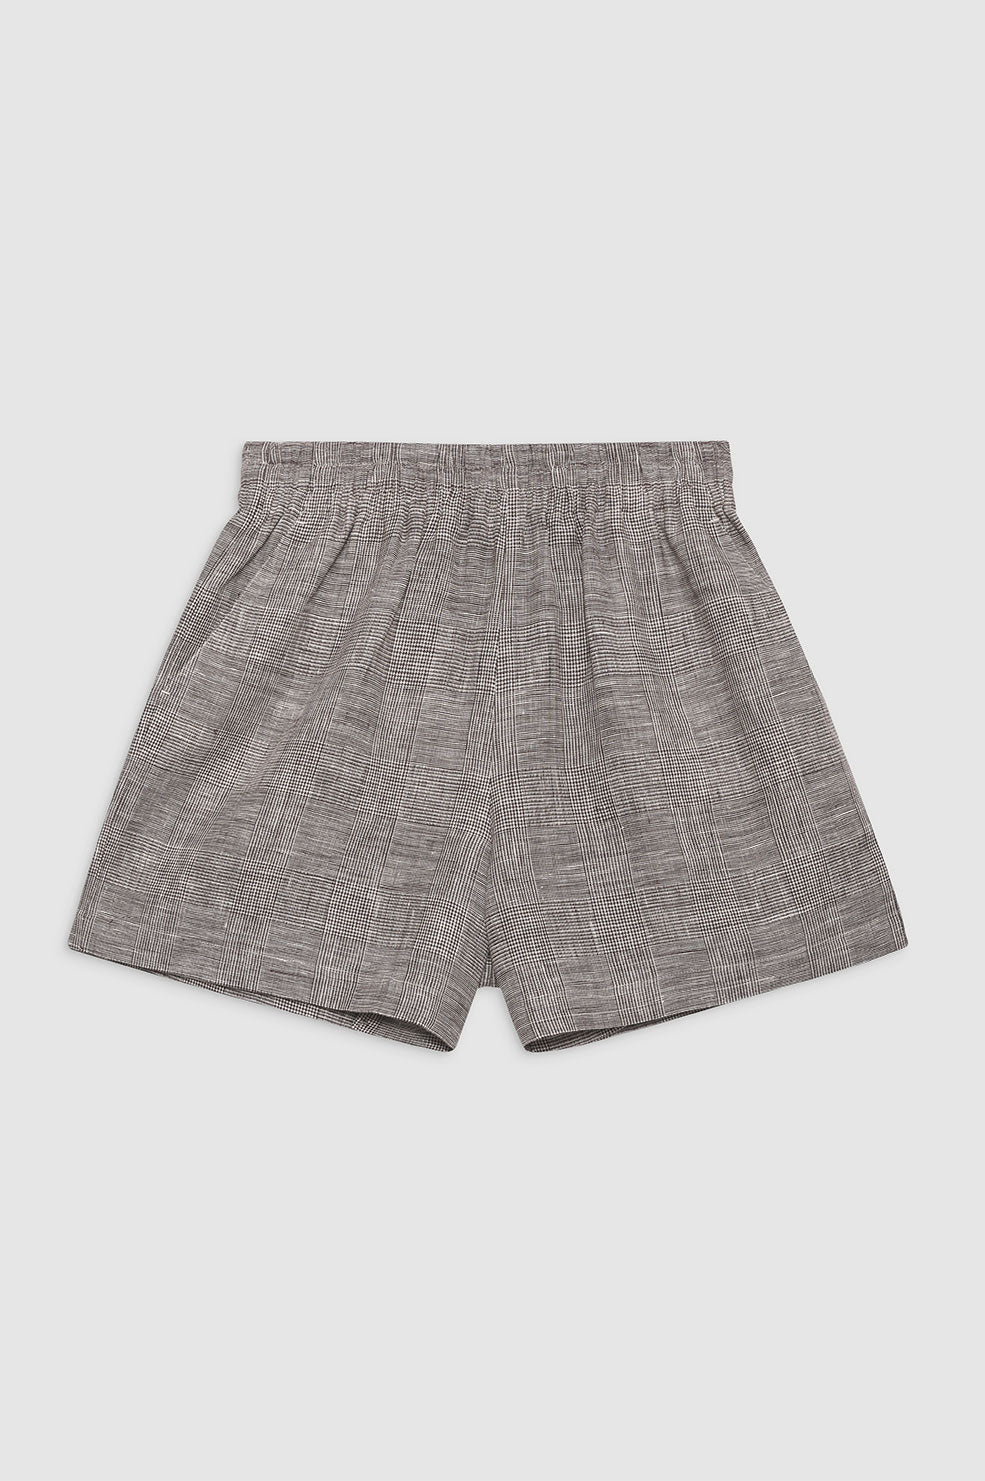 ANINE BING Kam Short - Brown Plaid - Front View